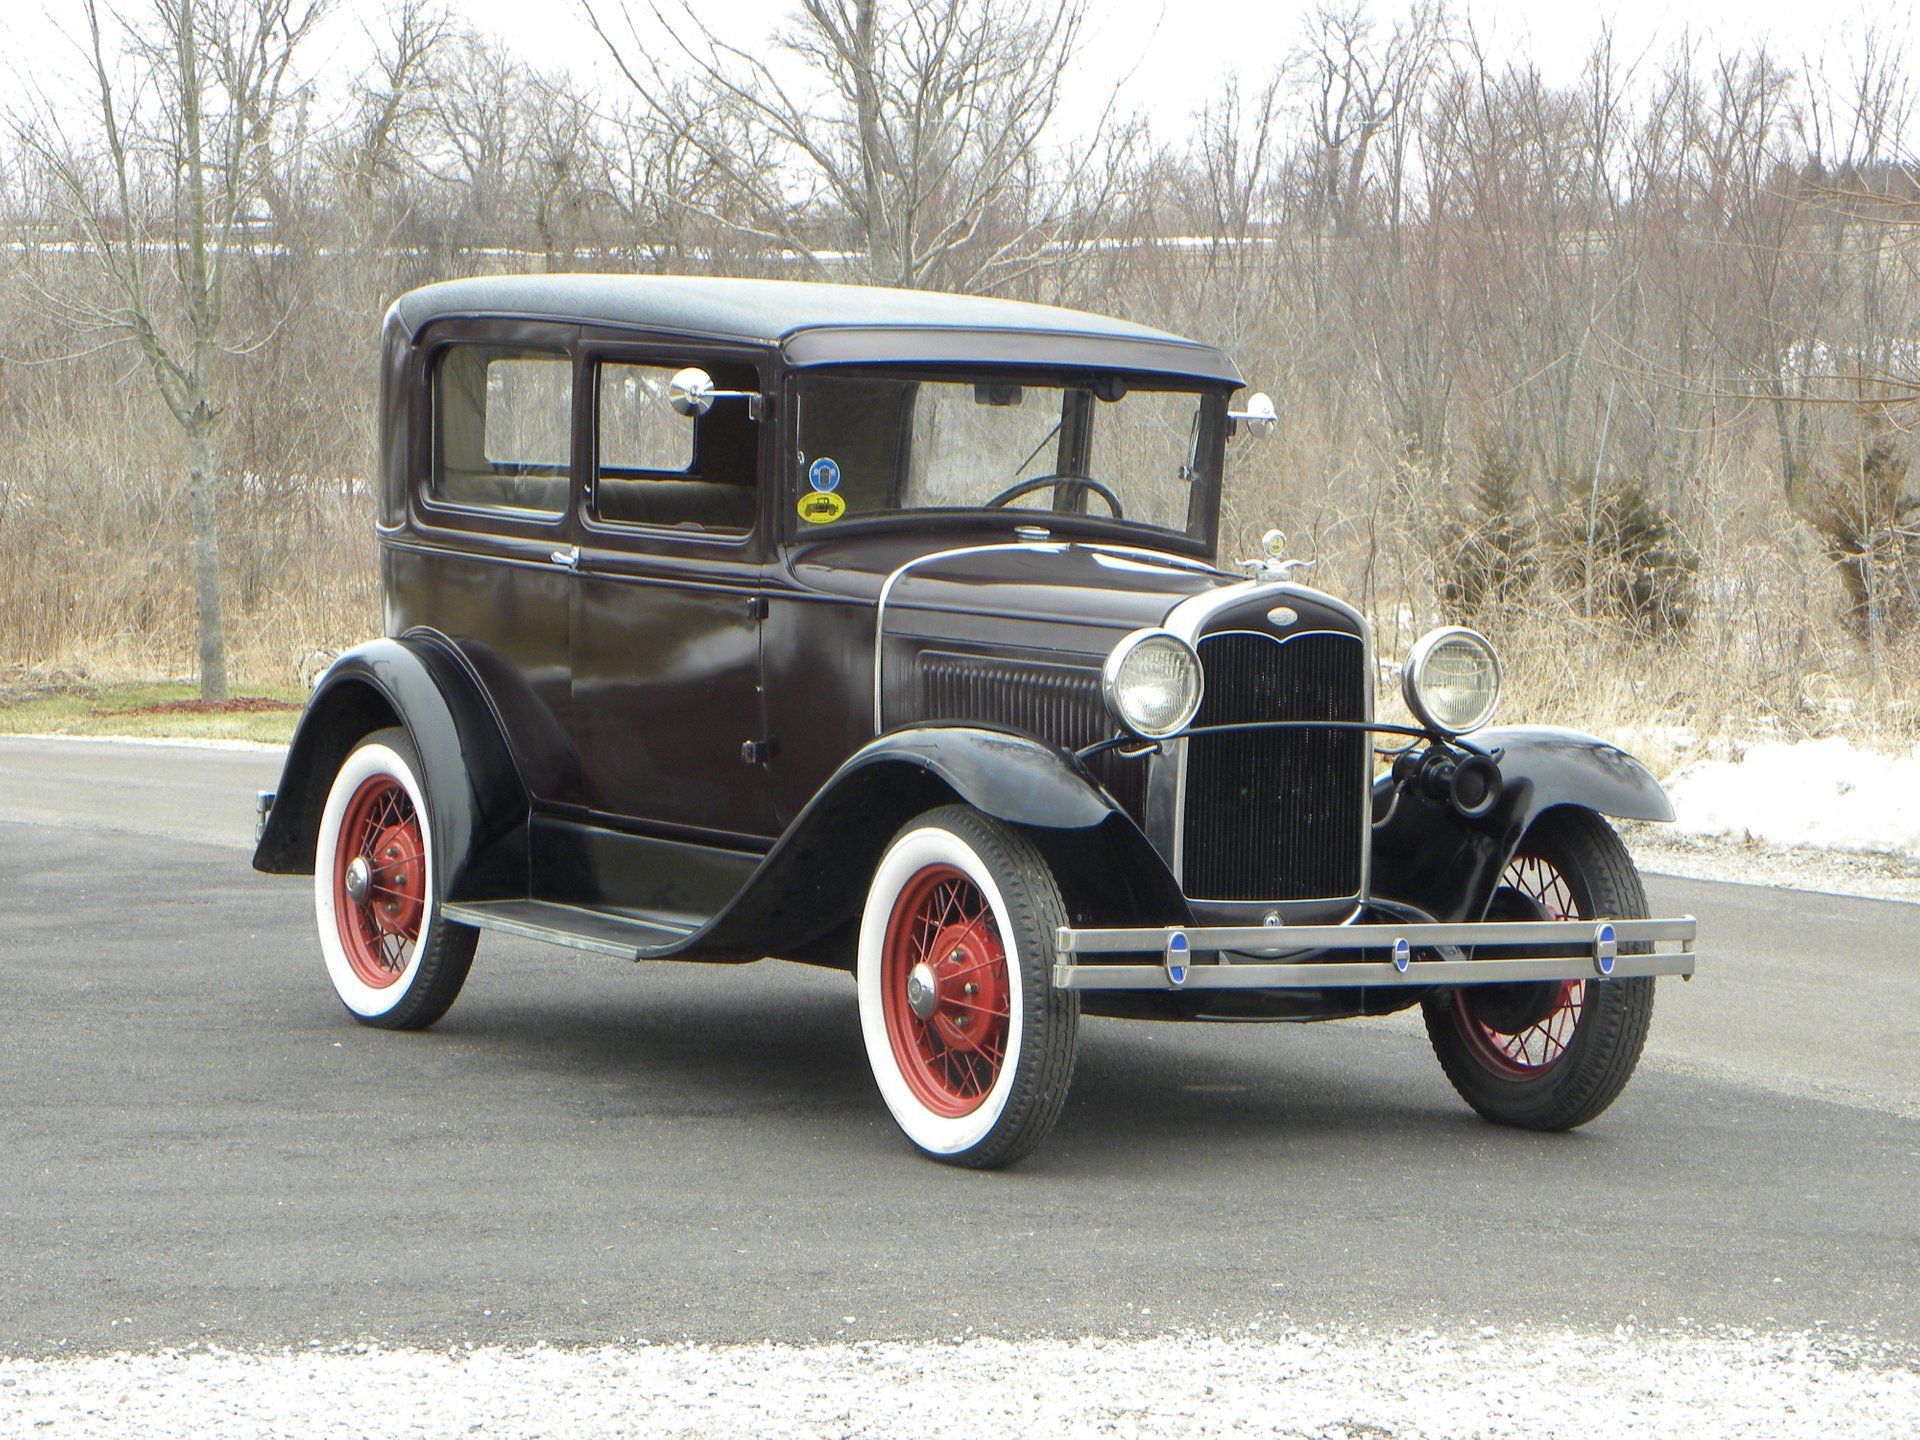 Black Ford Model A on winter road with leafless trees behind it